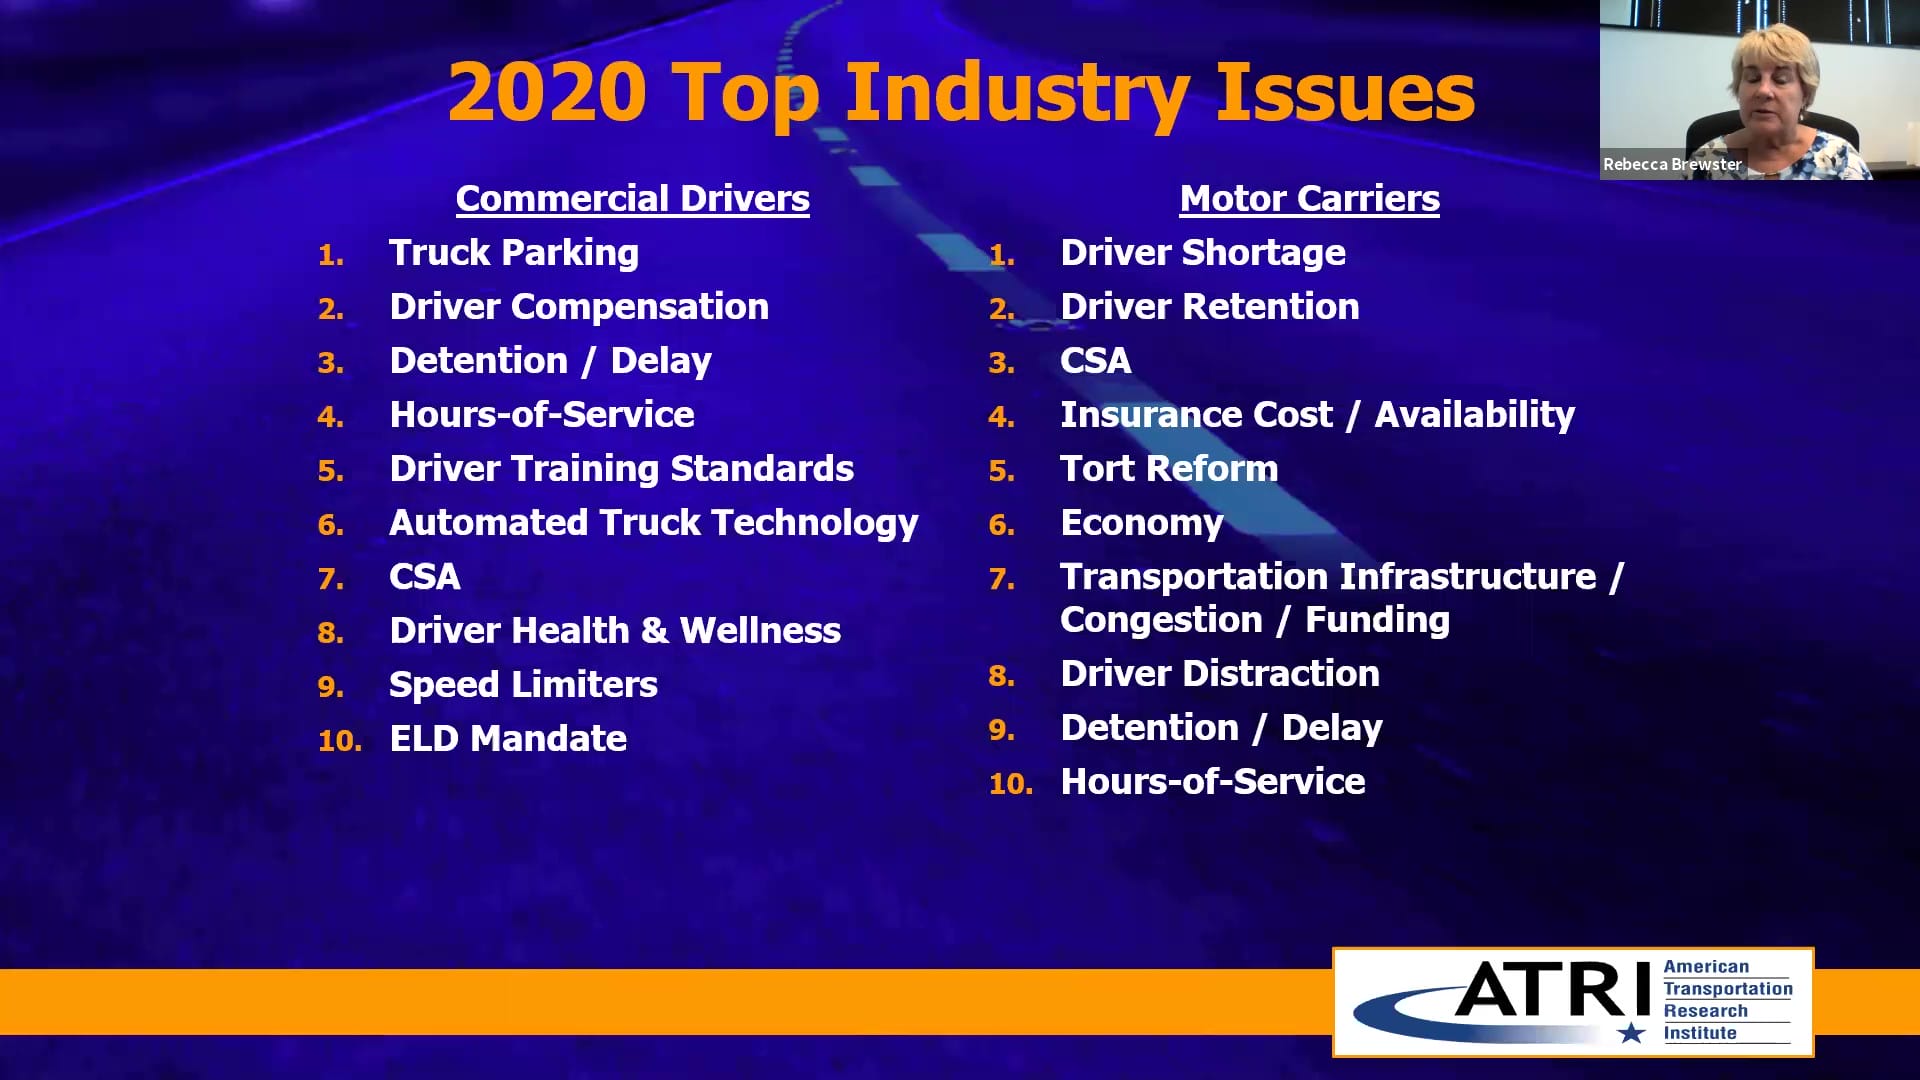 Trucking Industry Concerns 2020 from ATRI Top Issues for Drivers & Motor Carriers